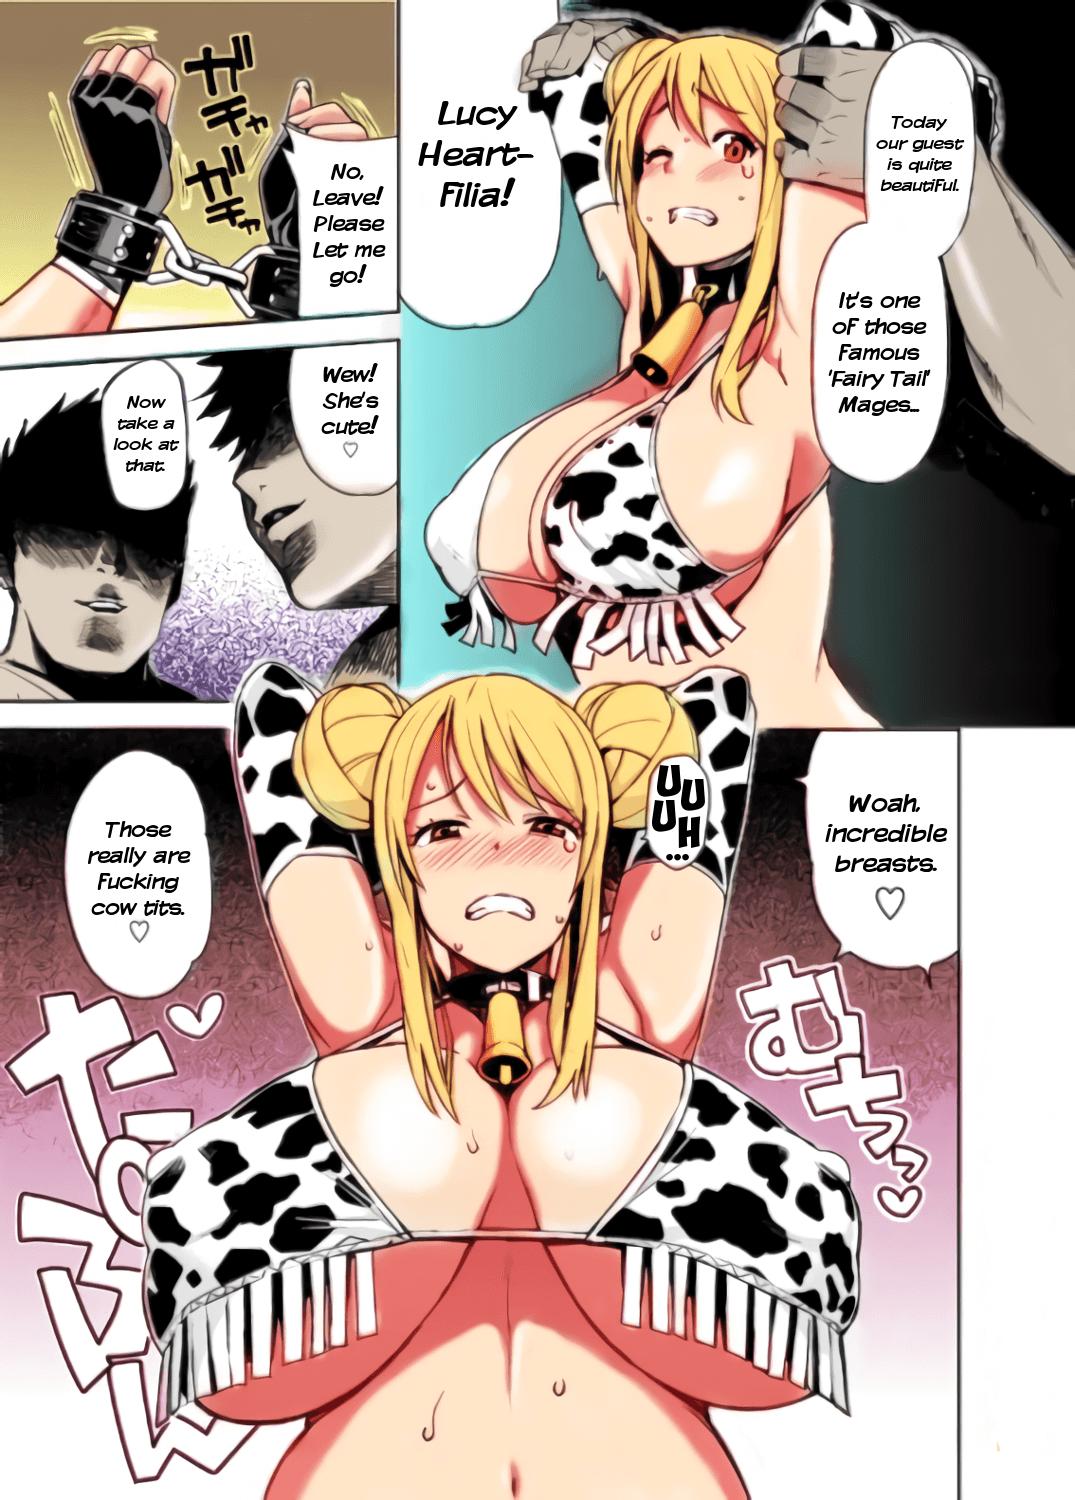 Hot Naked Girl Witch Bitch Collection Vol. 1 - Fairy tail Kissing - Page 2